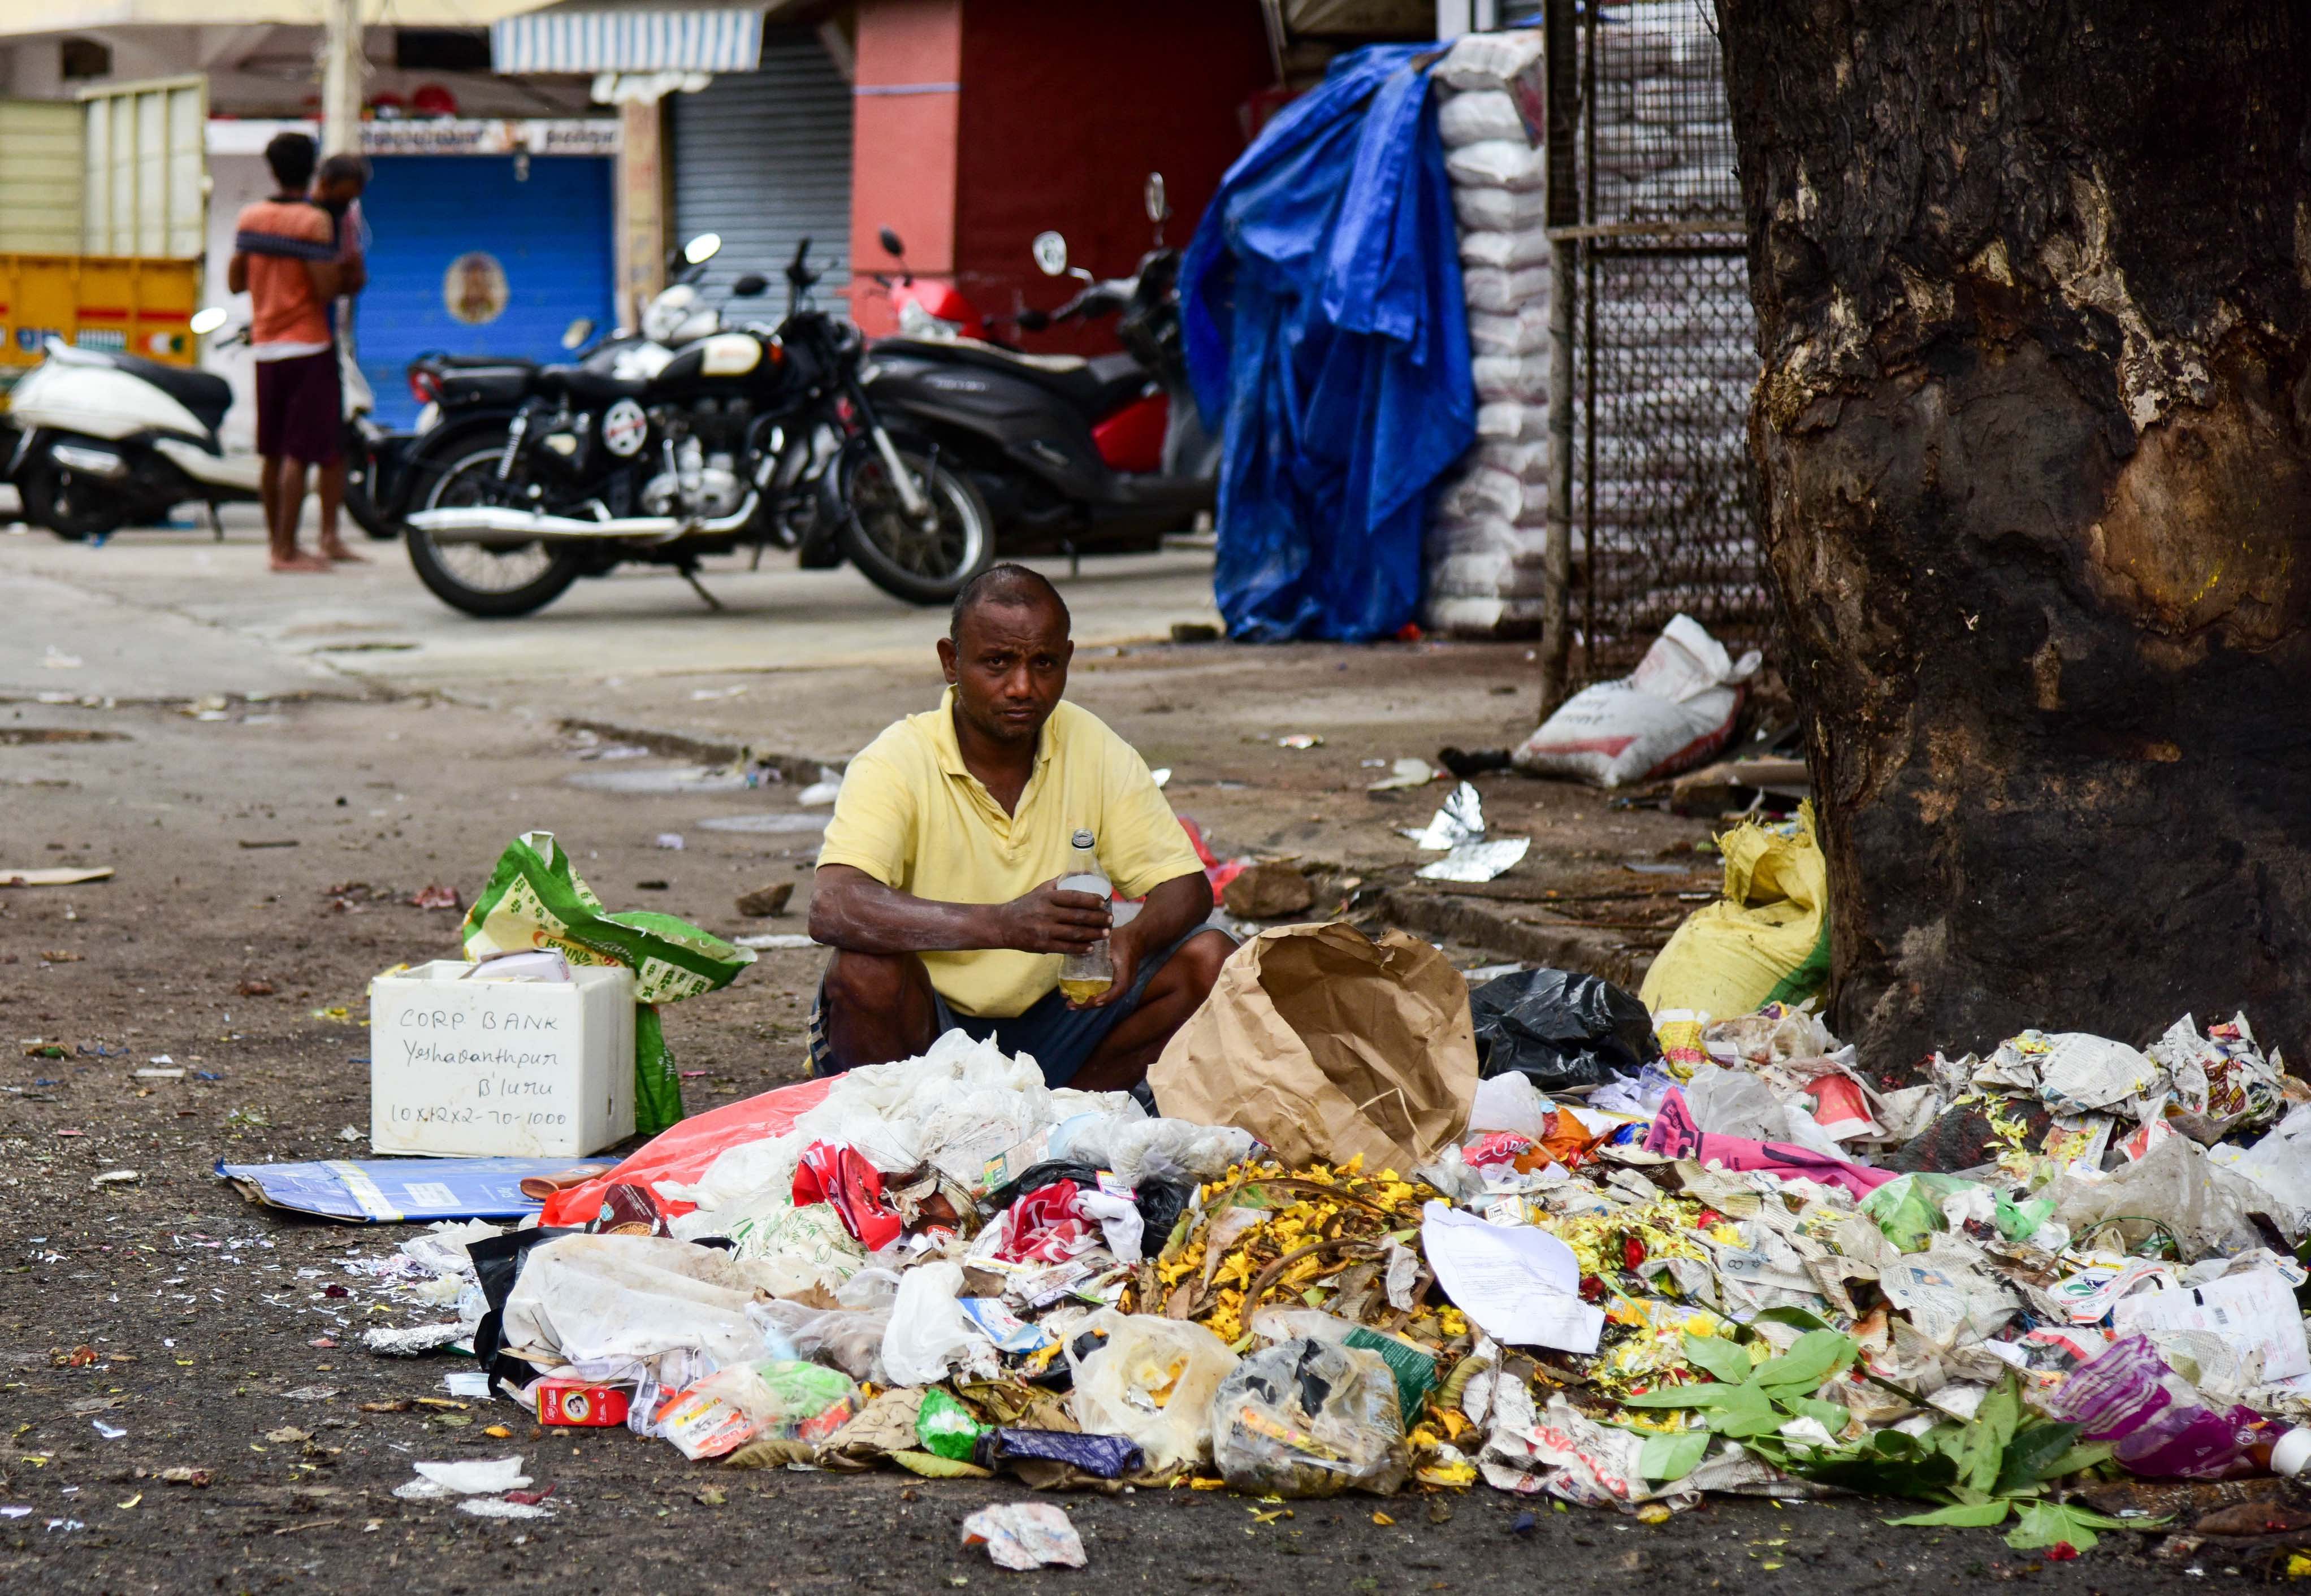 The shutdown of recycling units has severely disrupted the dry waste collection process in the city. Collection centres across the city are now loaded with recyclable material. This has severely affected the waste pickers, many of whose livelihoods are now at stake. DH Photo